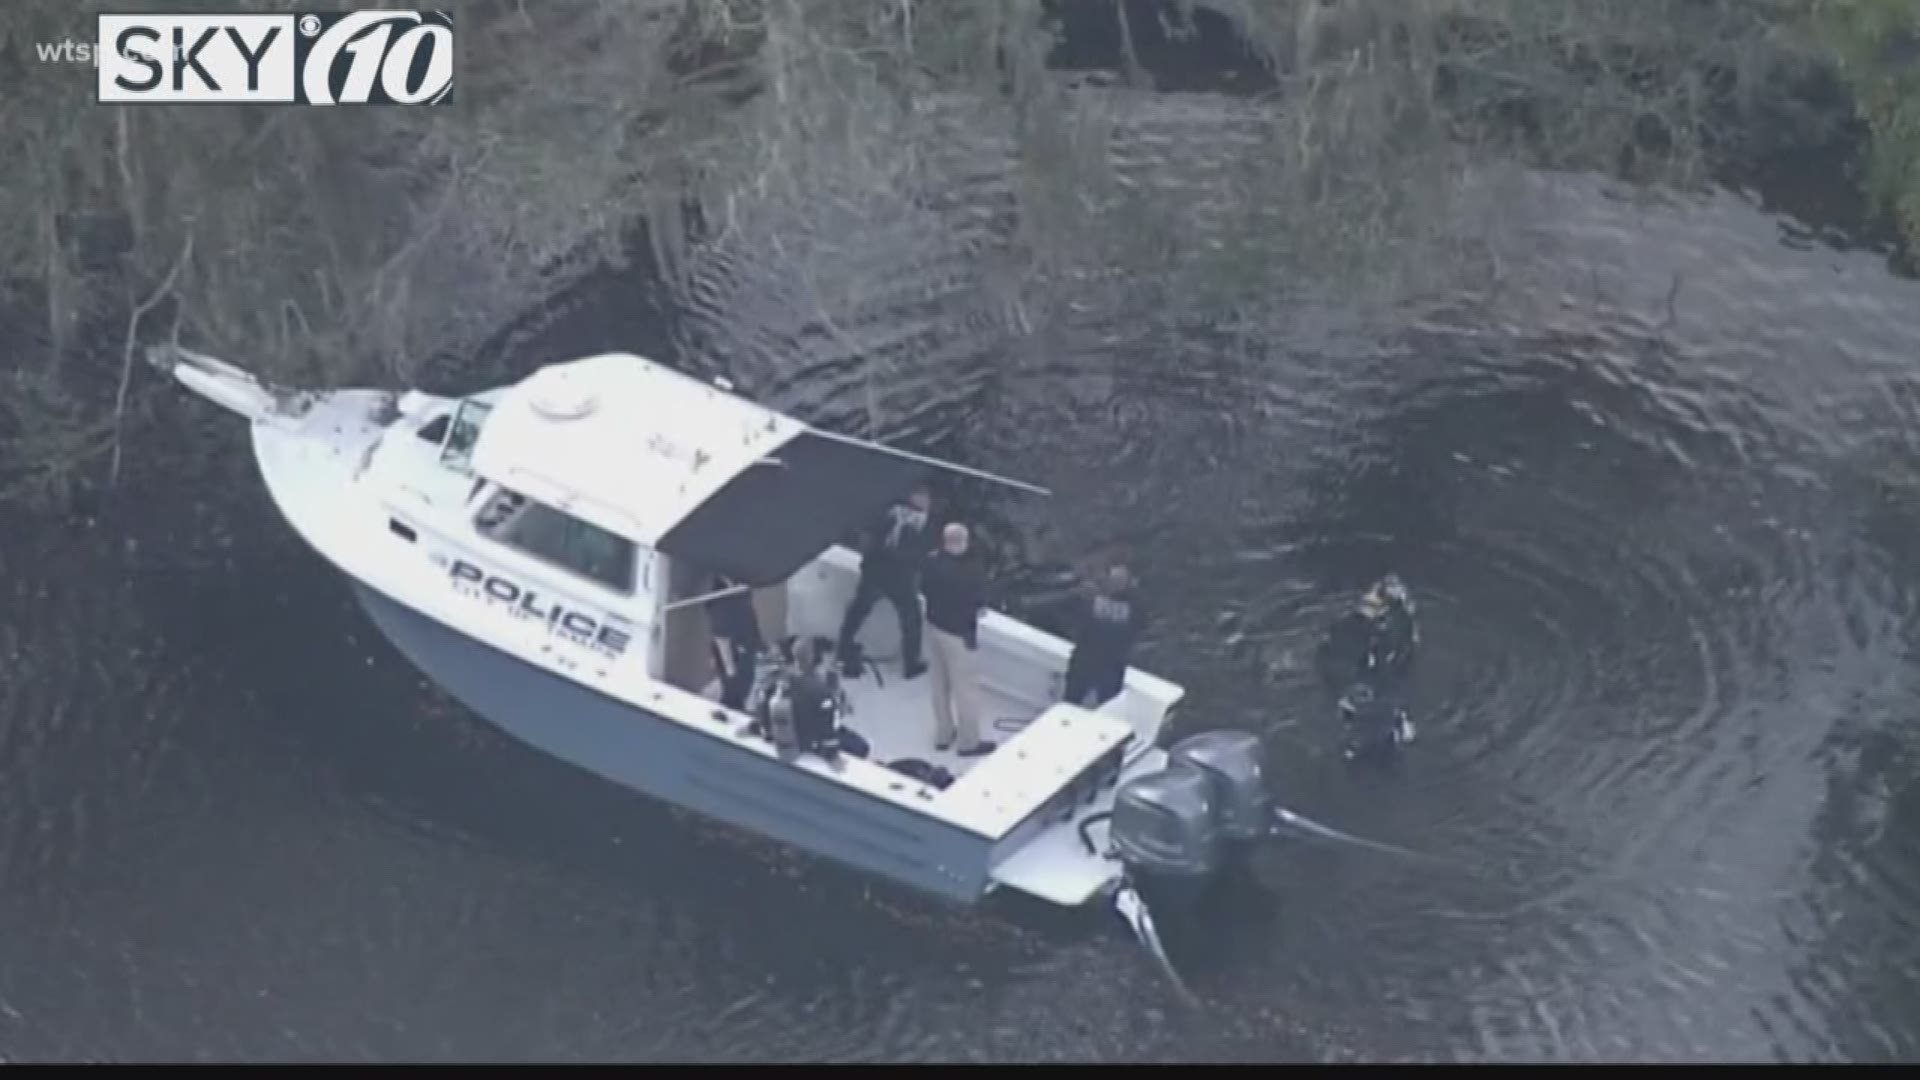 Officers say the body was discovered near a boat ramp. https://bit.ly/34vMKs7